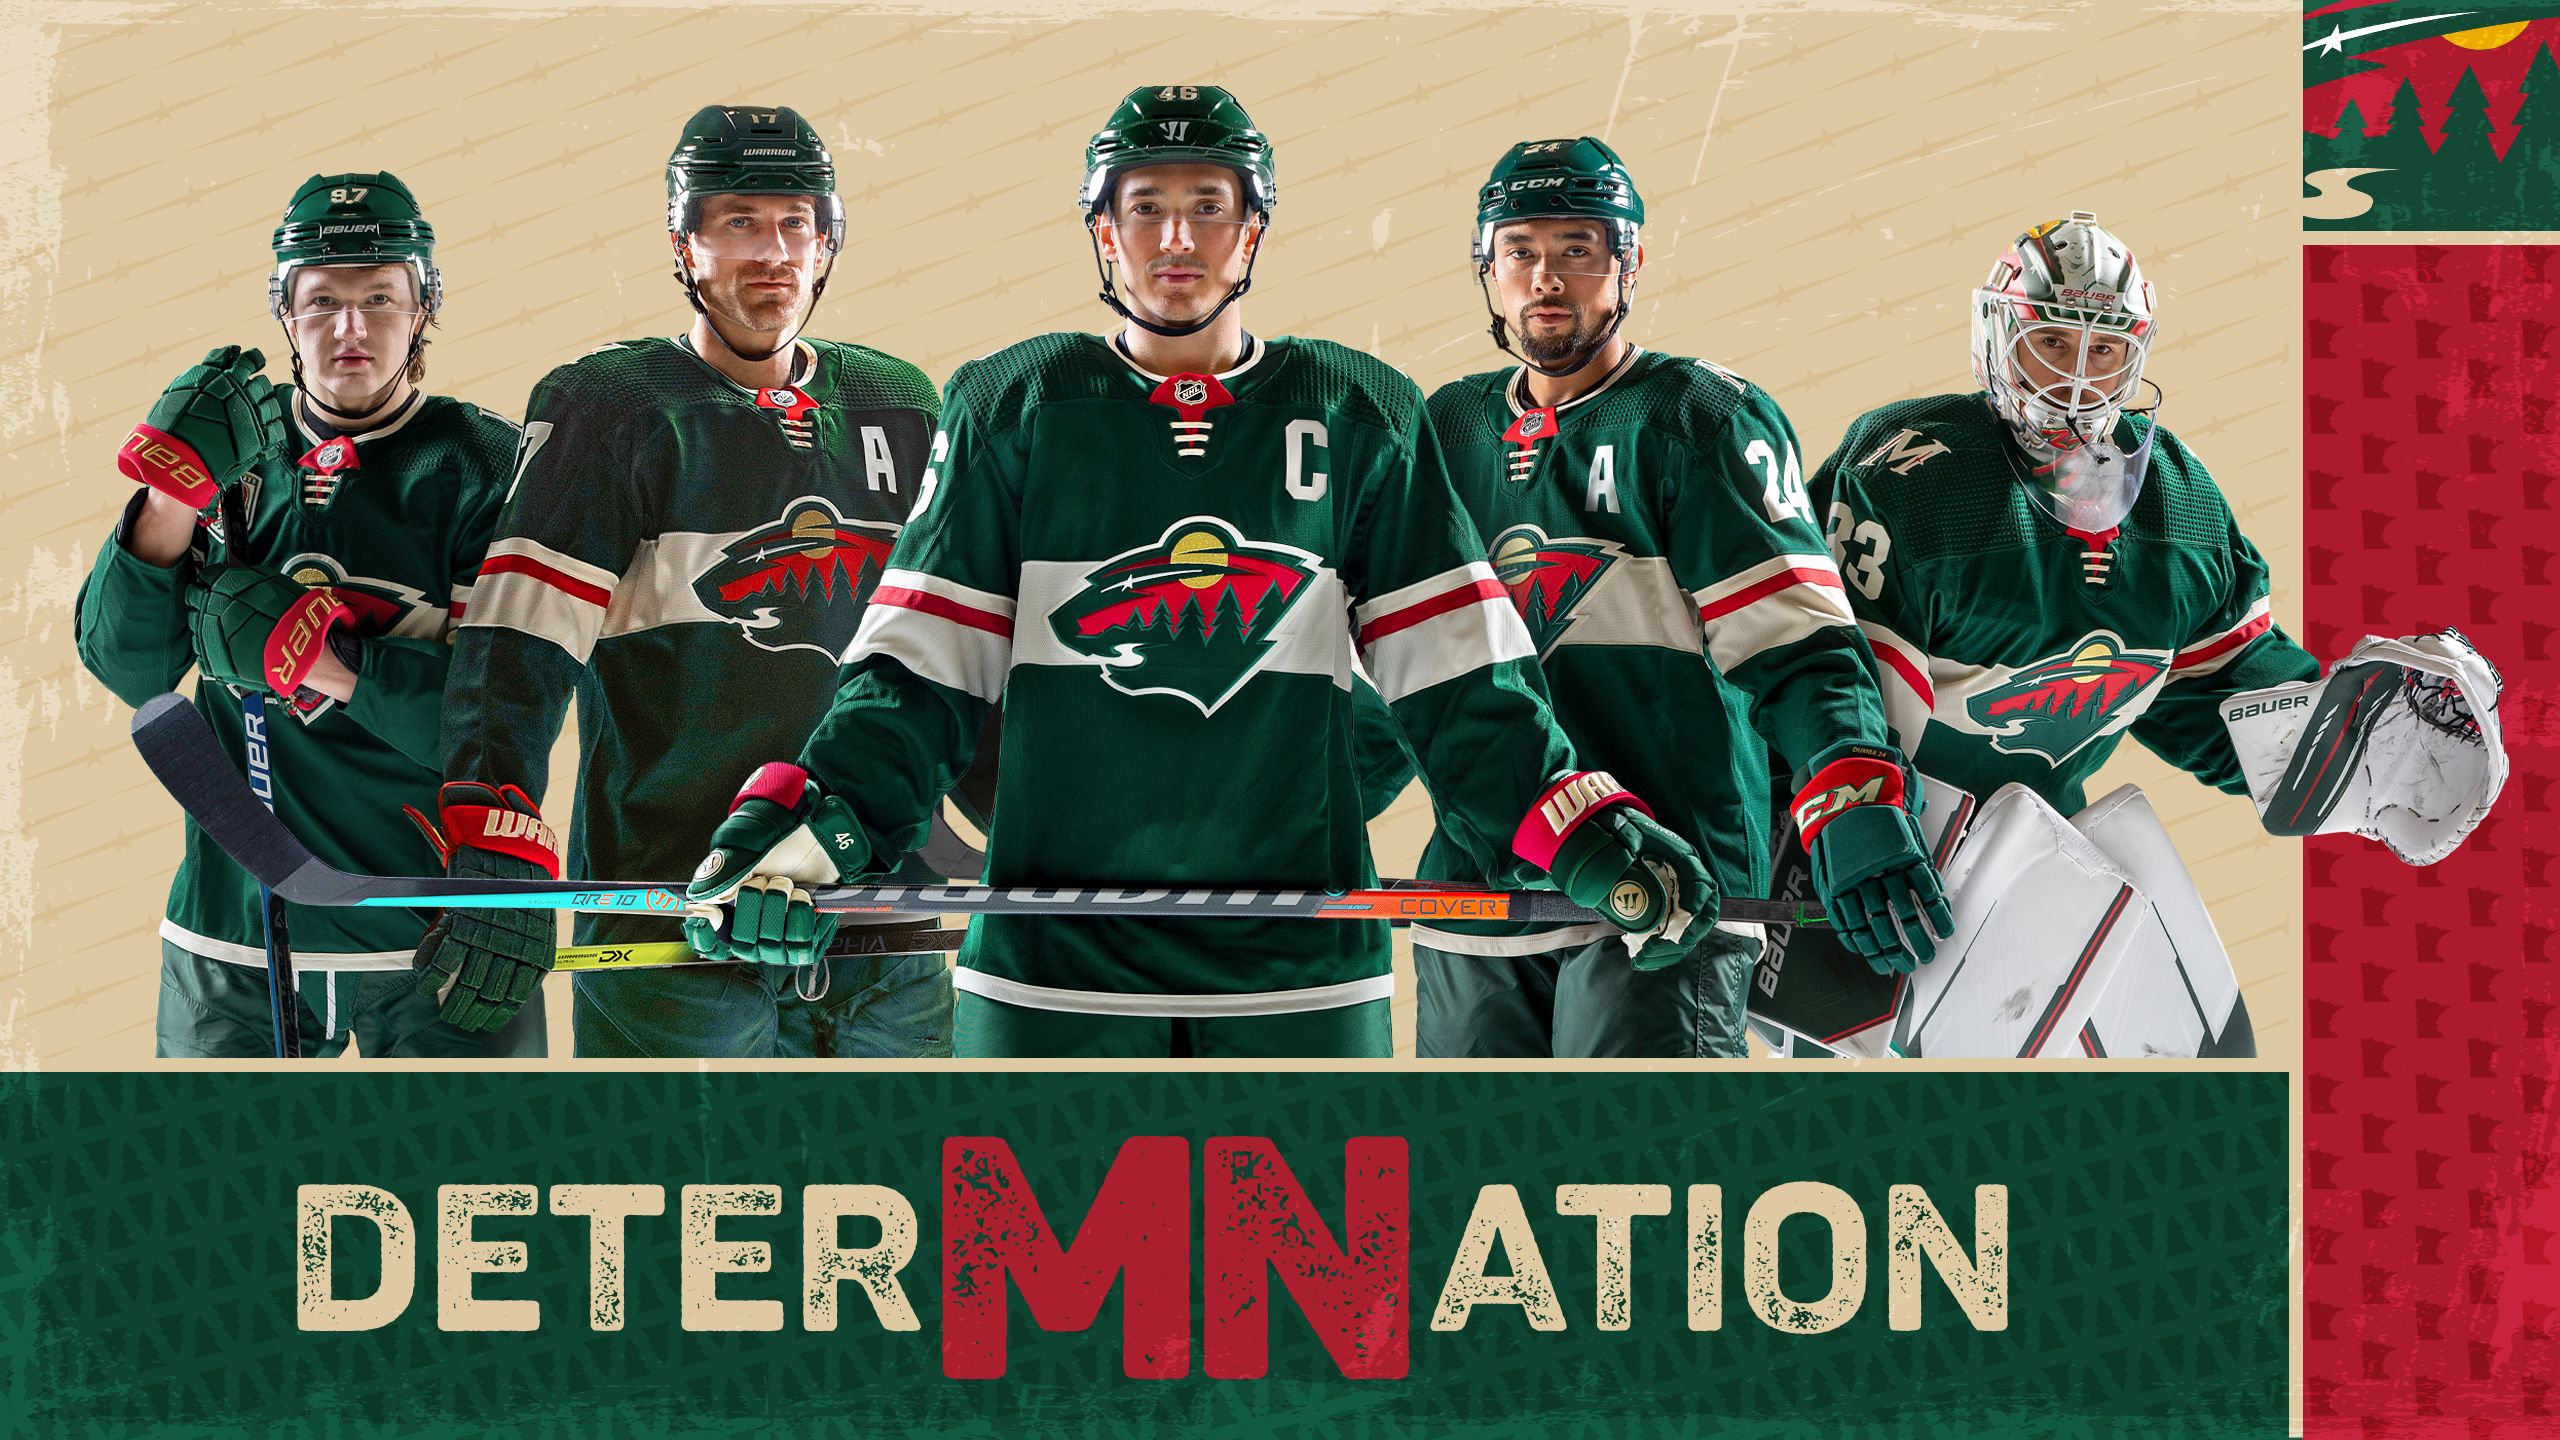 Minnesota wild on today feels like a good day to share new desktop wallpapers ð more httpstcopnpod httpstcopouhrikww